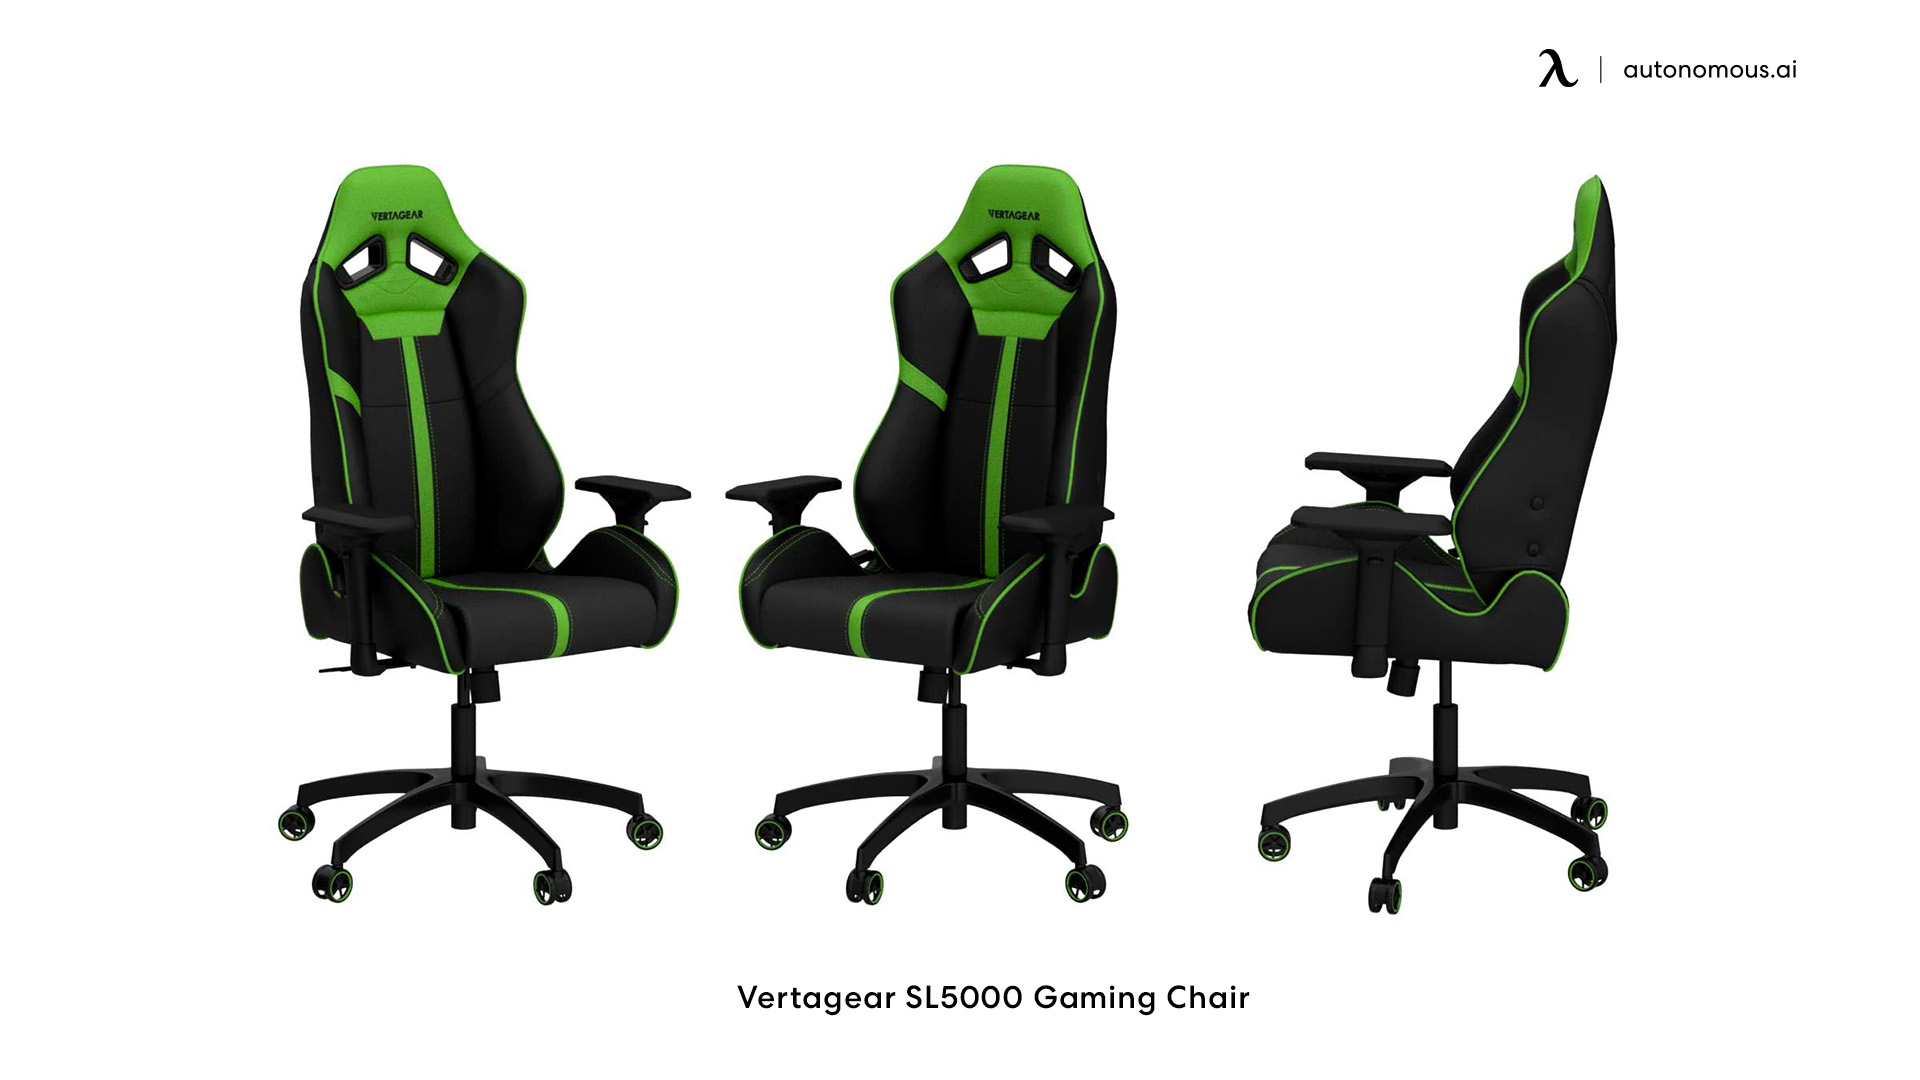 Vertagear SL5000 leather gaming chair